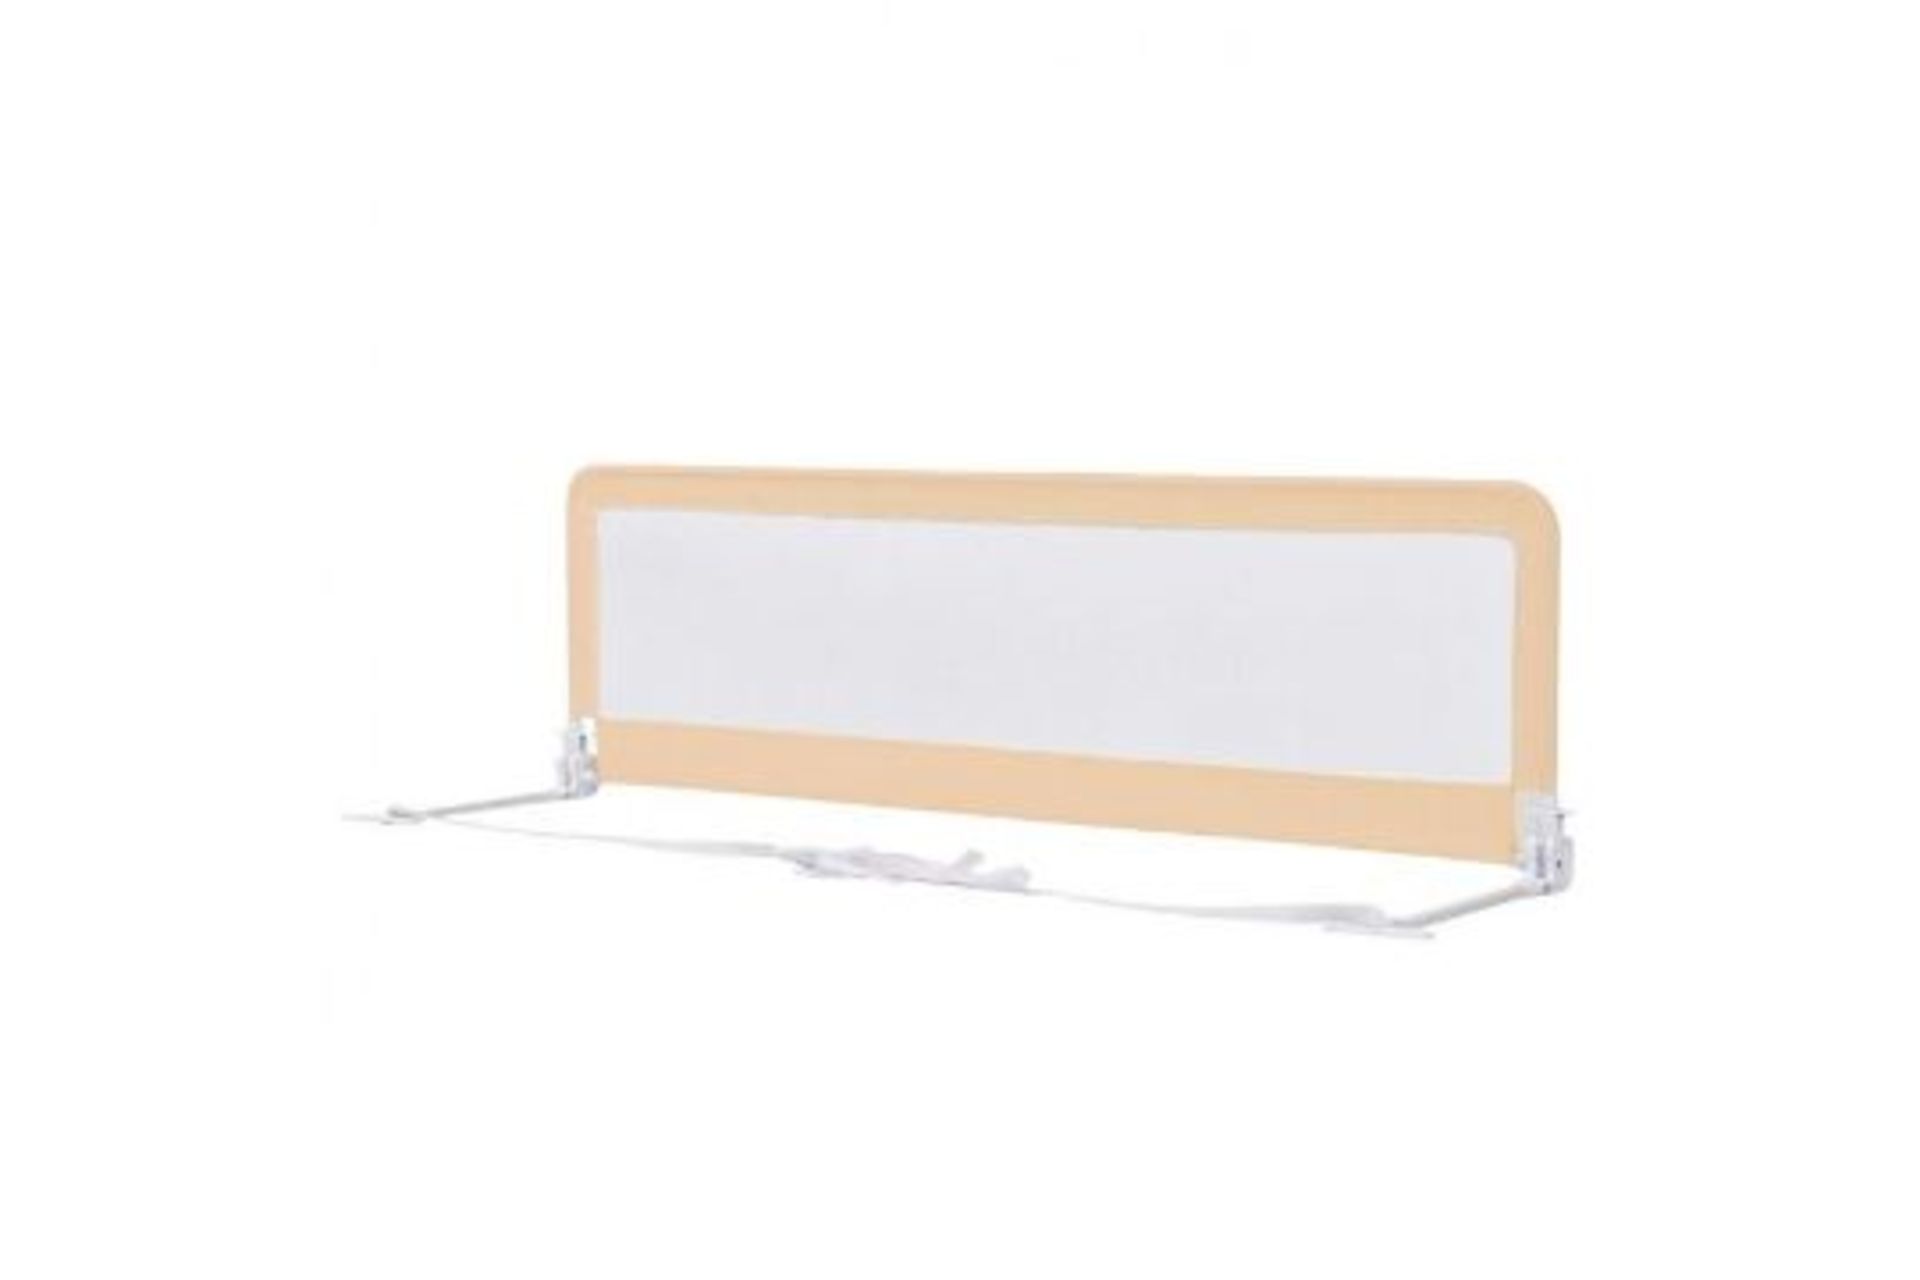 Universal Folding Bed Rail with Safety Strap. - R51. Transition from a toddler's bed to a big boy or